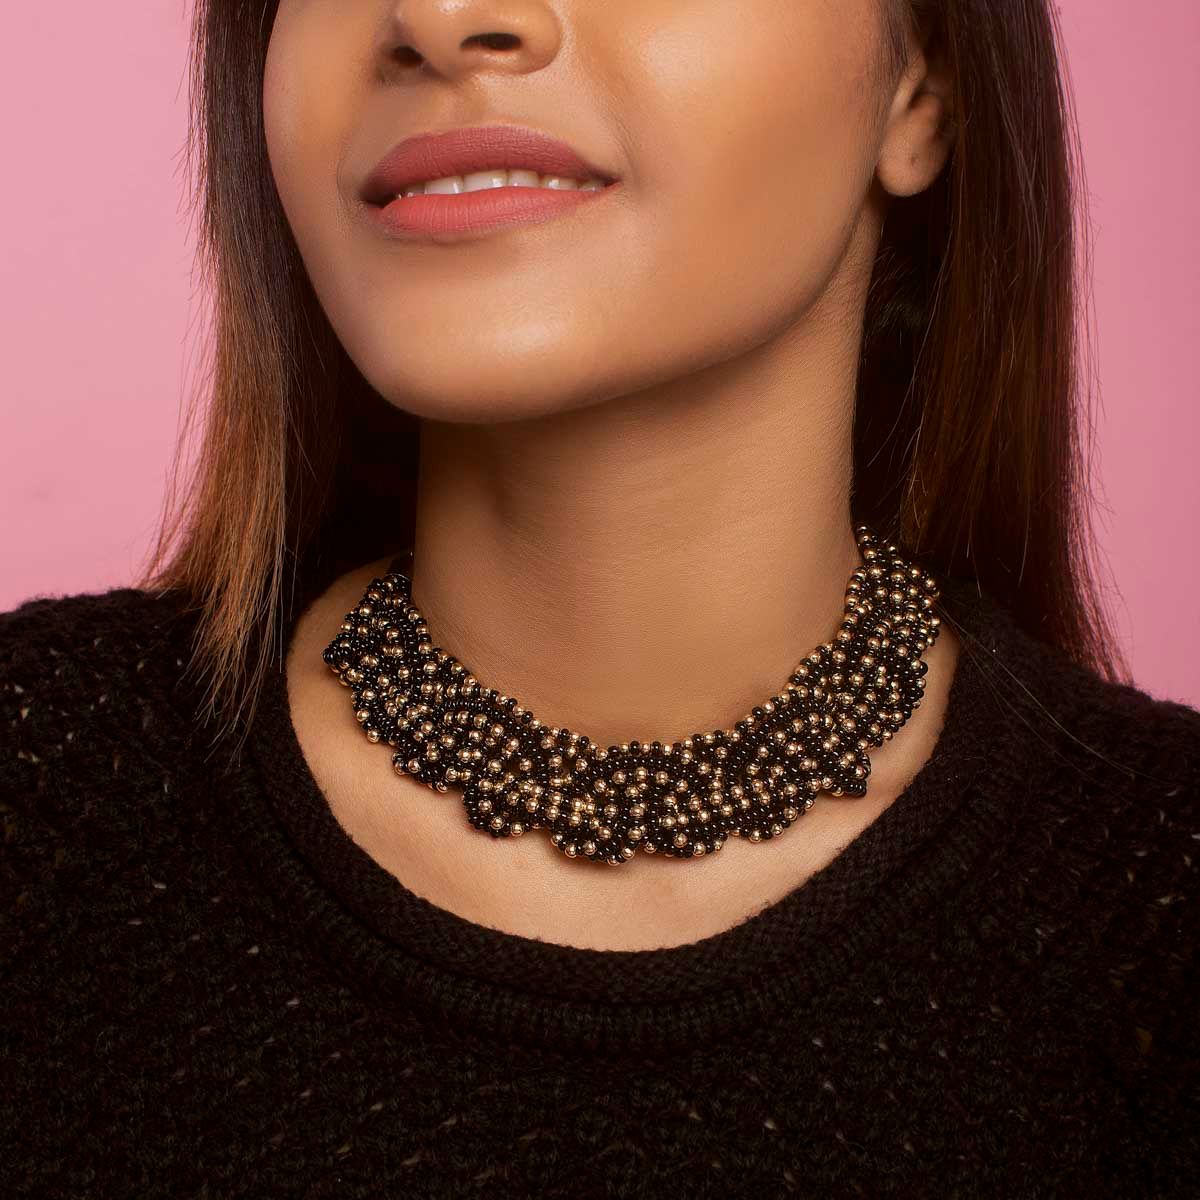 Amazon.com: Rumtock Black Rice Beads Choker Necklace for Women and Girls  Halloween Black Jewelry : Clothing, Shoes & Jewelry